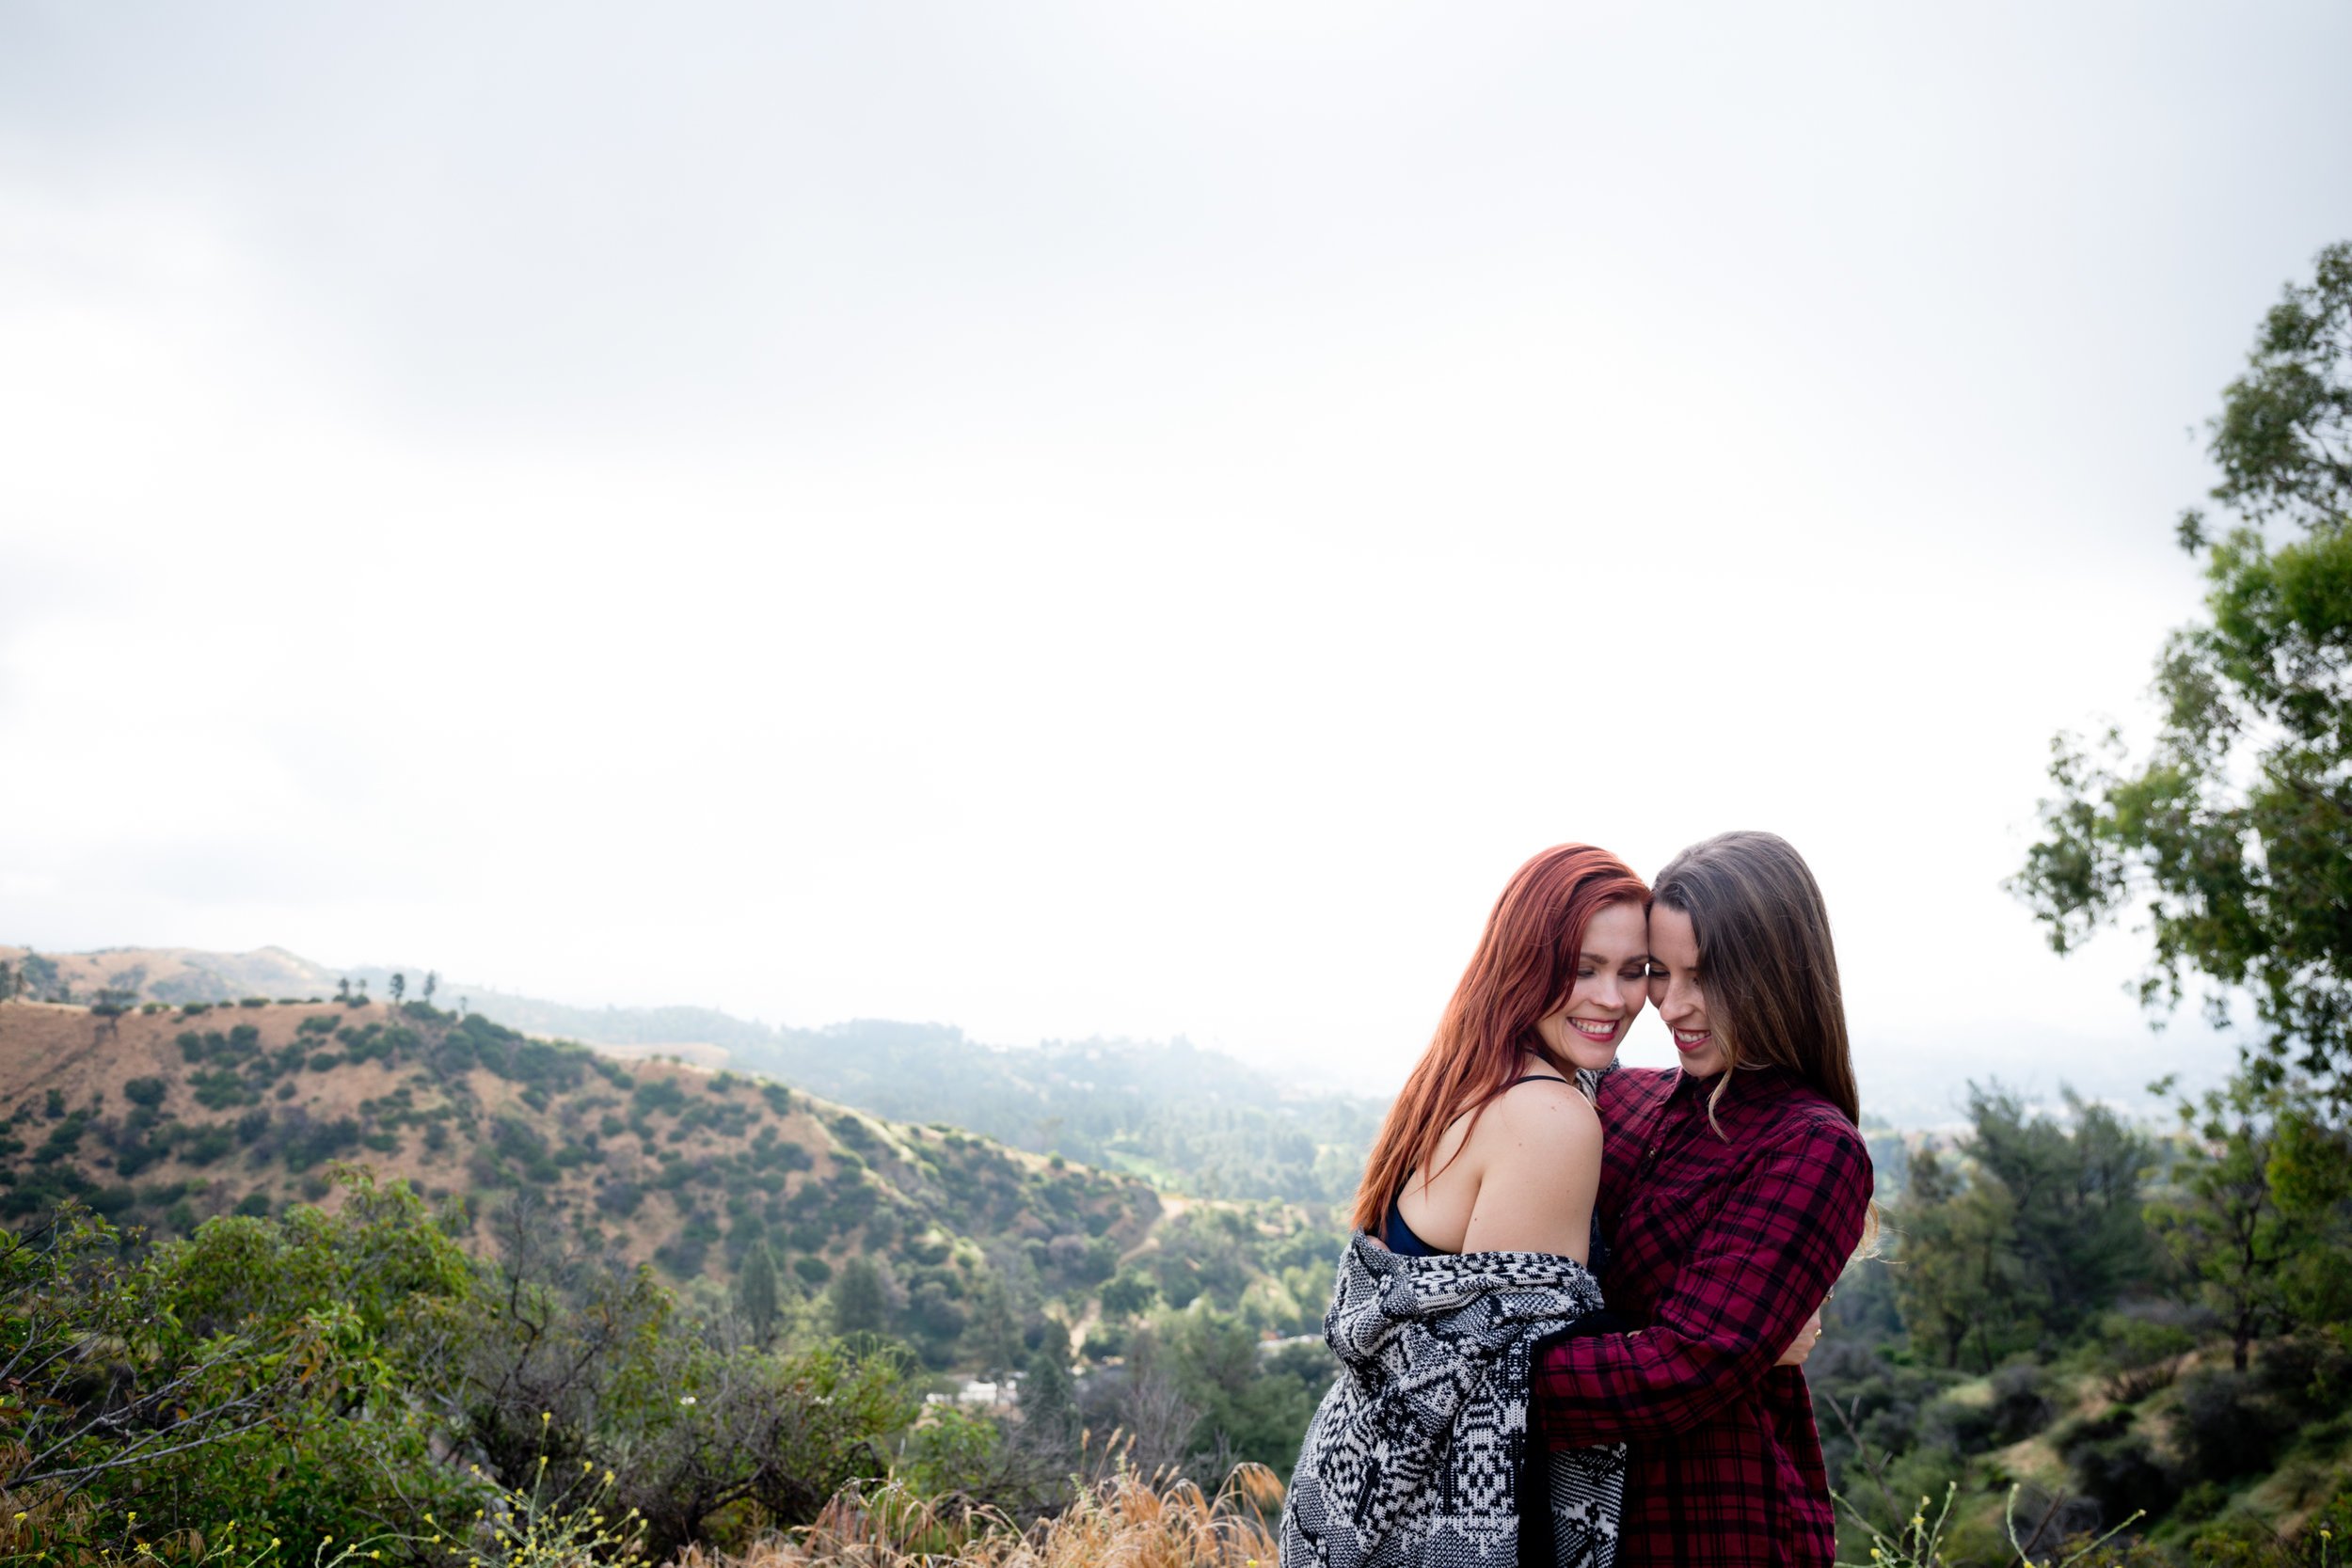 Courtney &amp; Tierney embracing with the hills of Los Angeles in the background